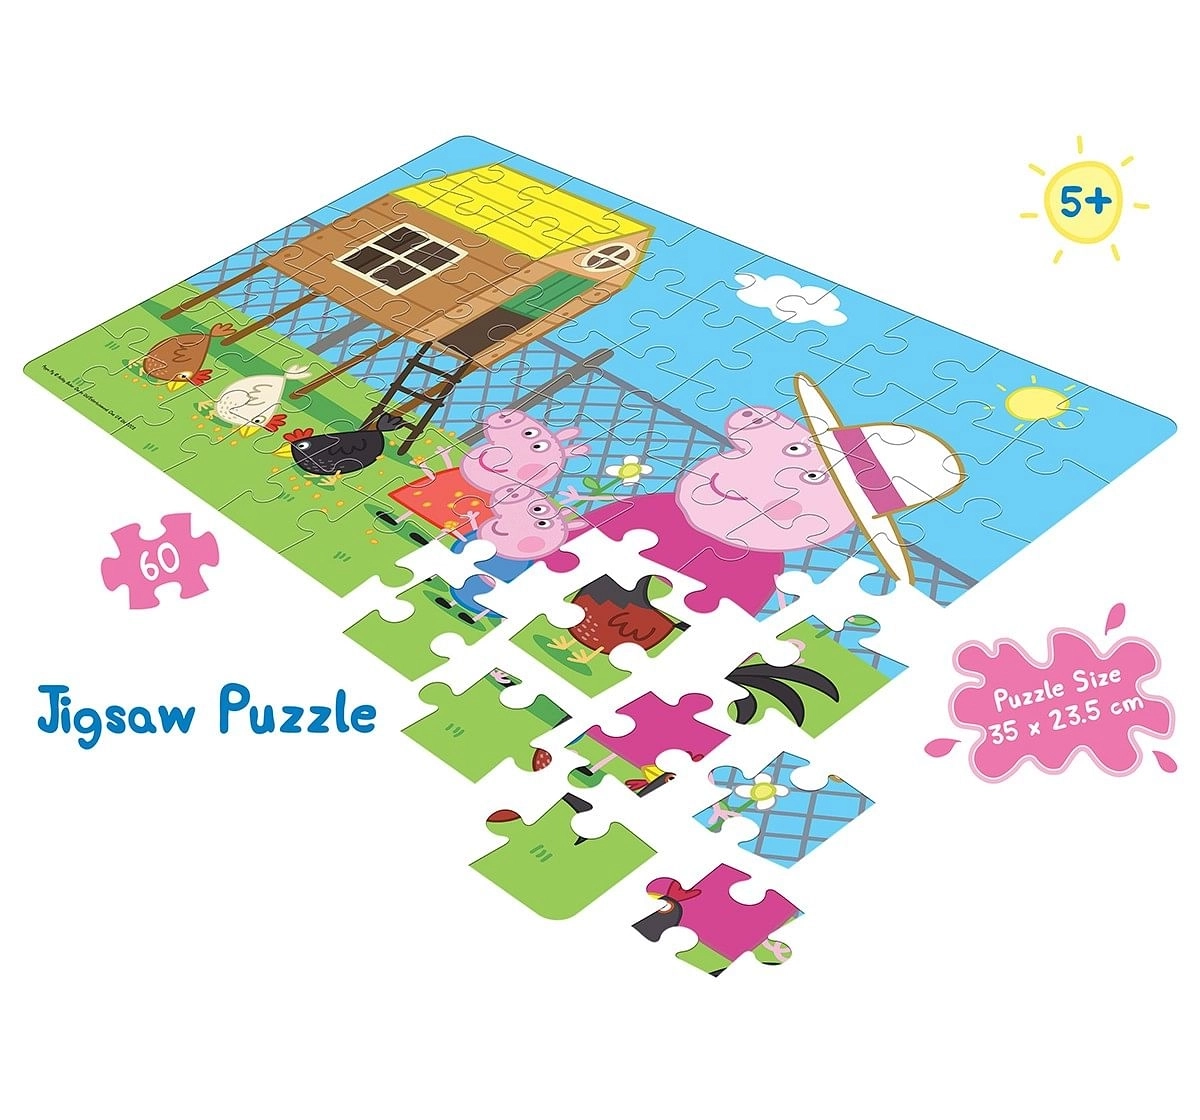 Frank Peppa Pig 60 Pcs Puzzle Puzzles for Kids age 5Y+